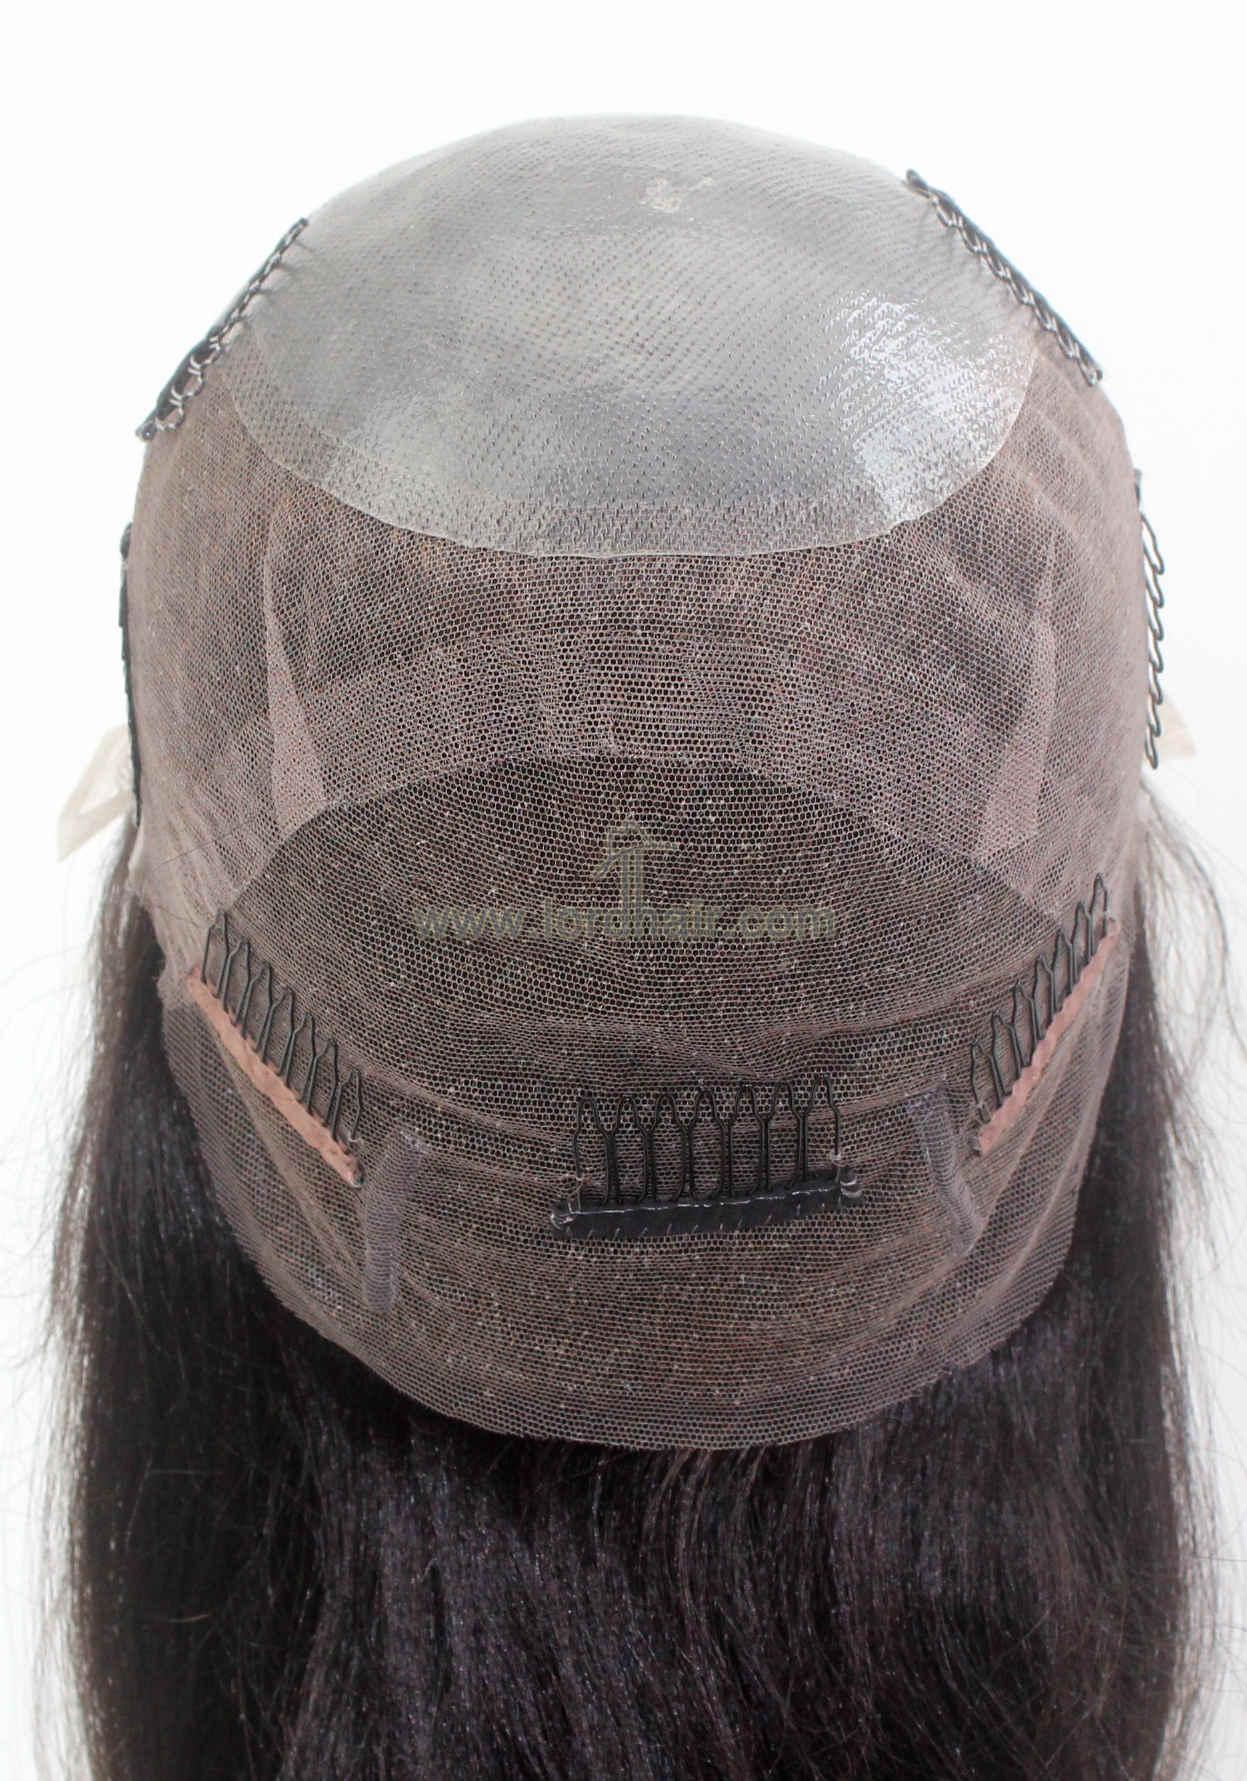 YJ914: Best Indian Human Hair French Lace with Thin Skin Hair System